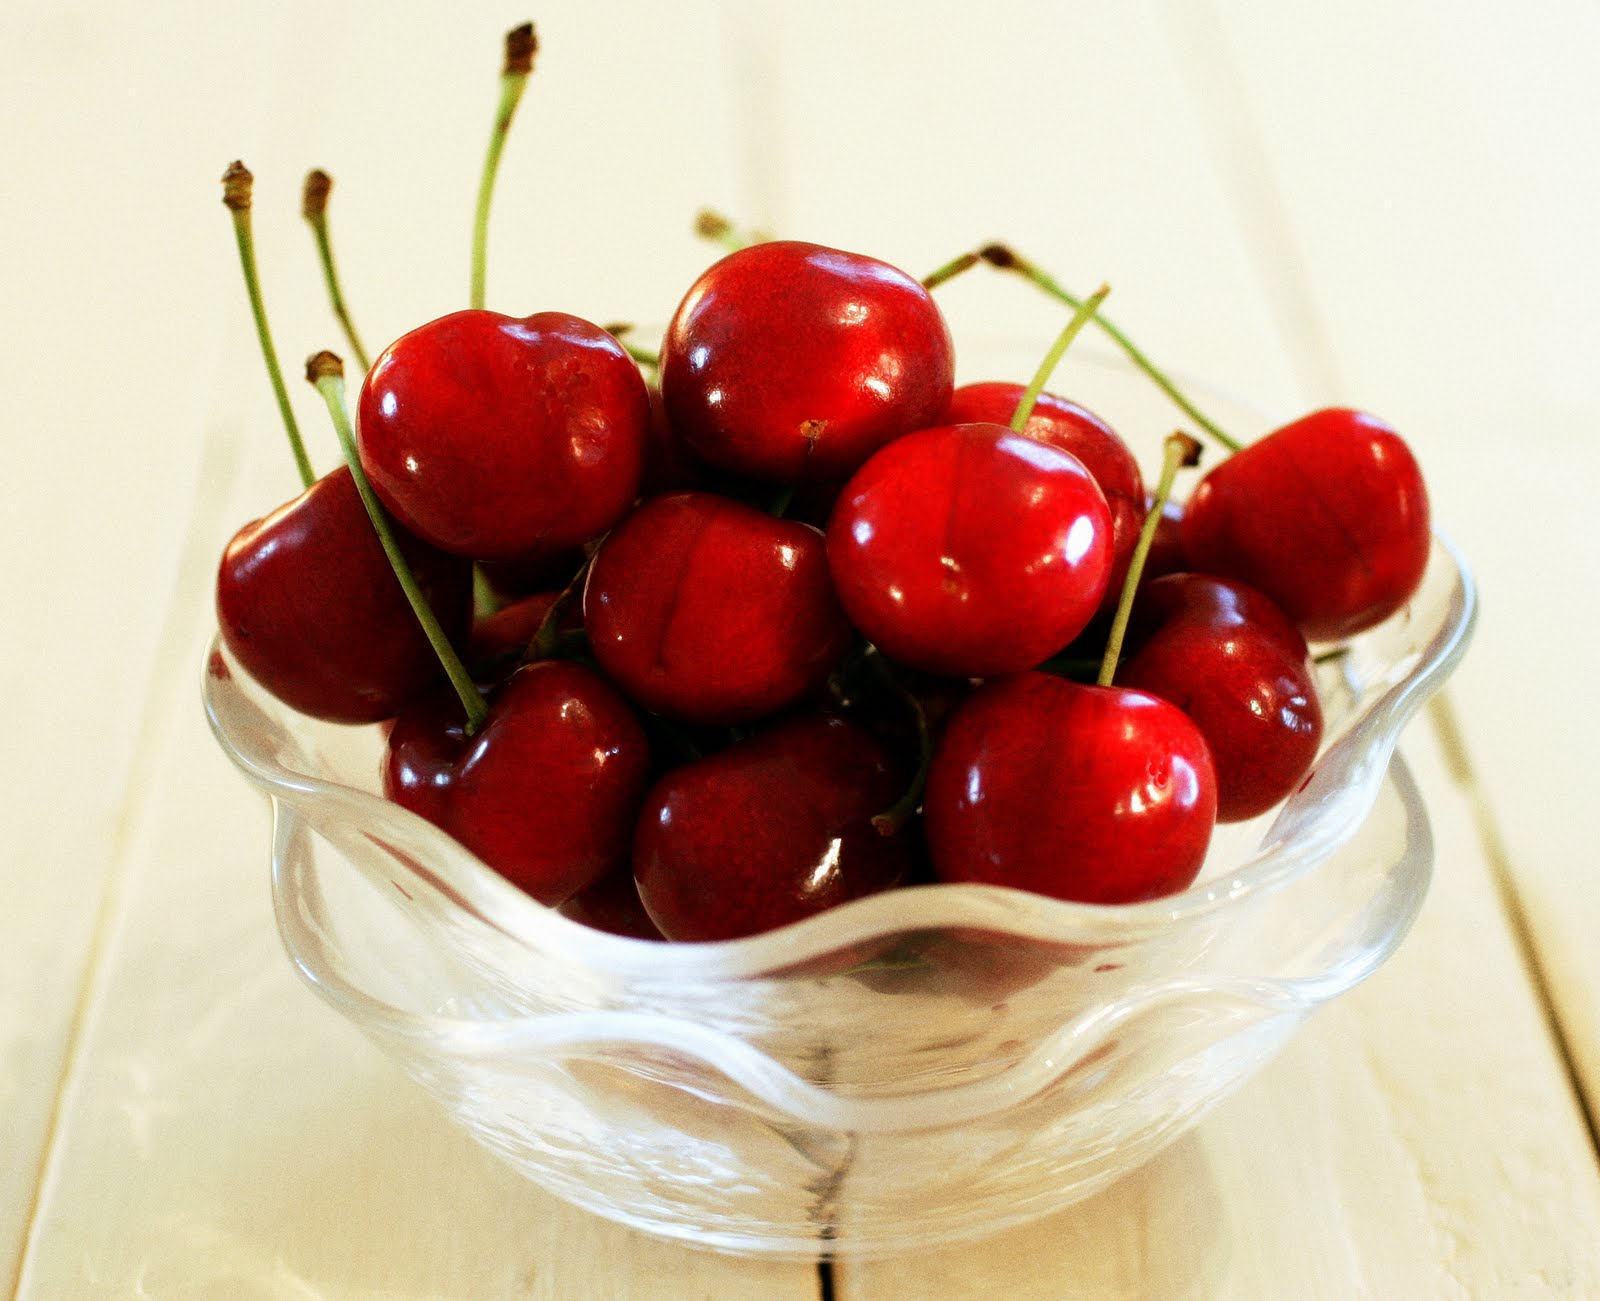 LabRoots Blog | Life is a Bowl of Cherries When You Get a Good ...